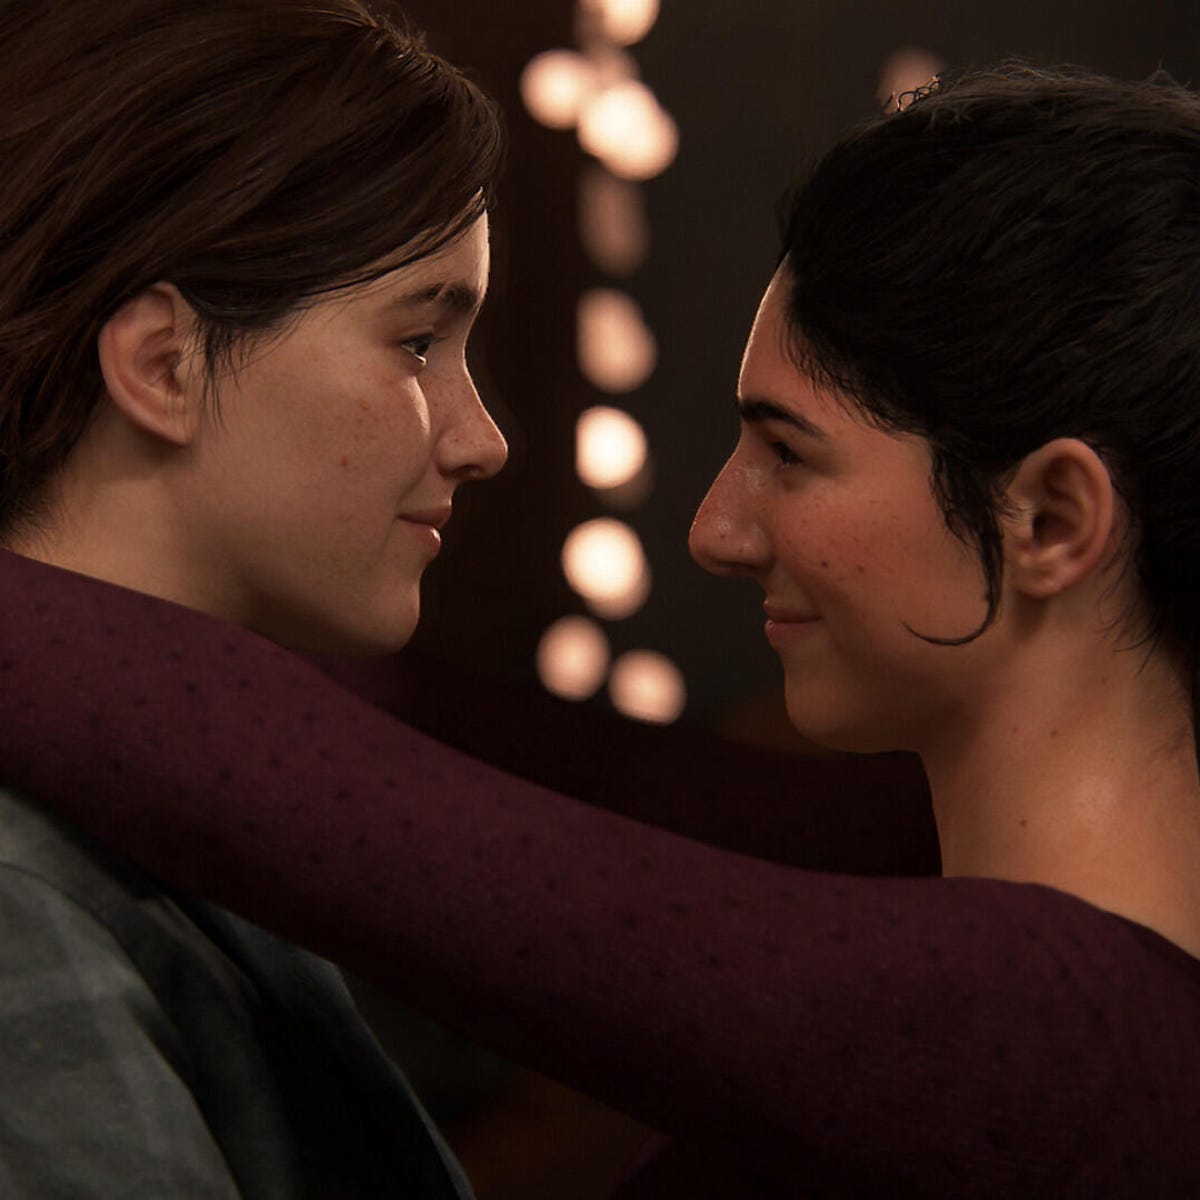 The Last of Us Part 2 sells 4M, becomes fastest-selling Sony game